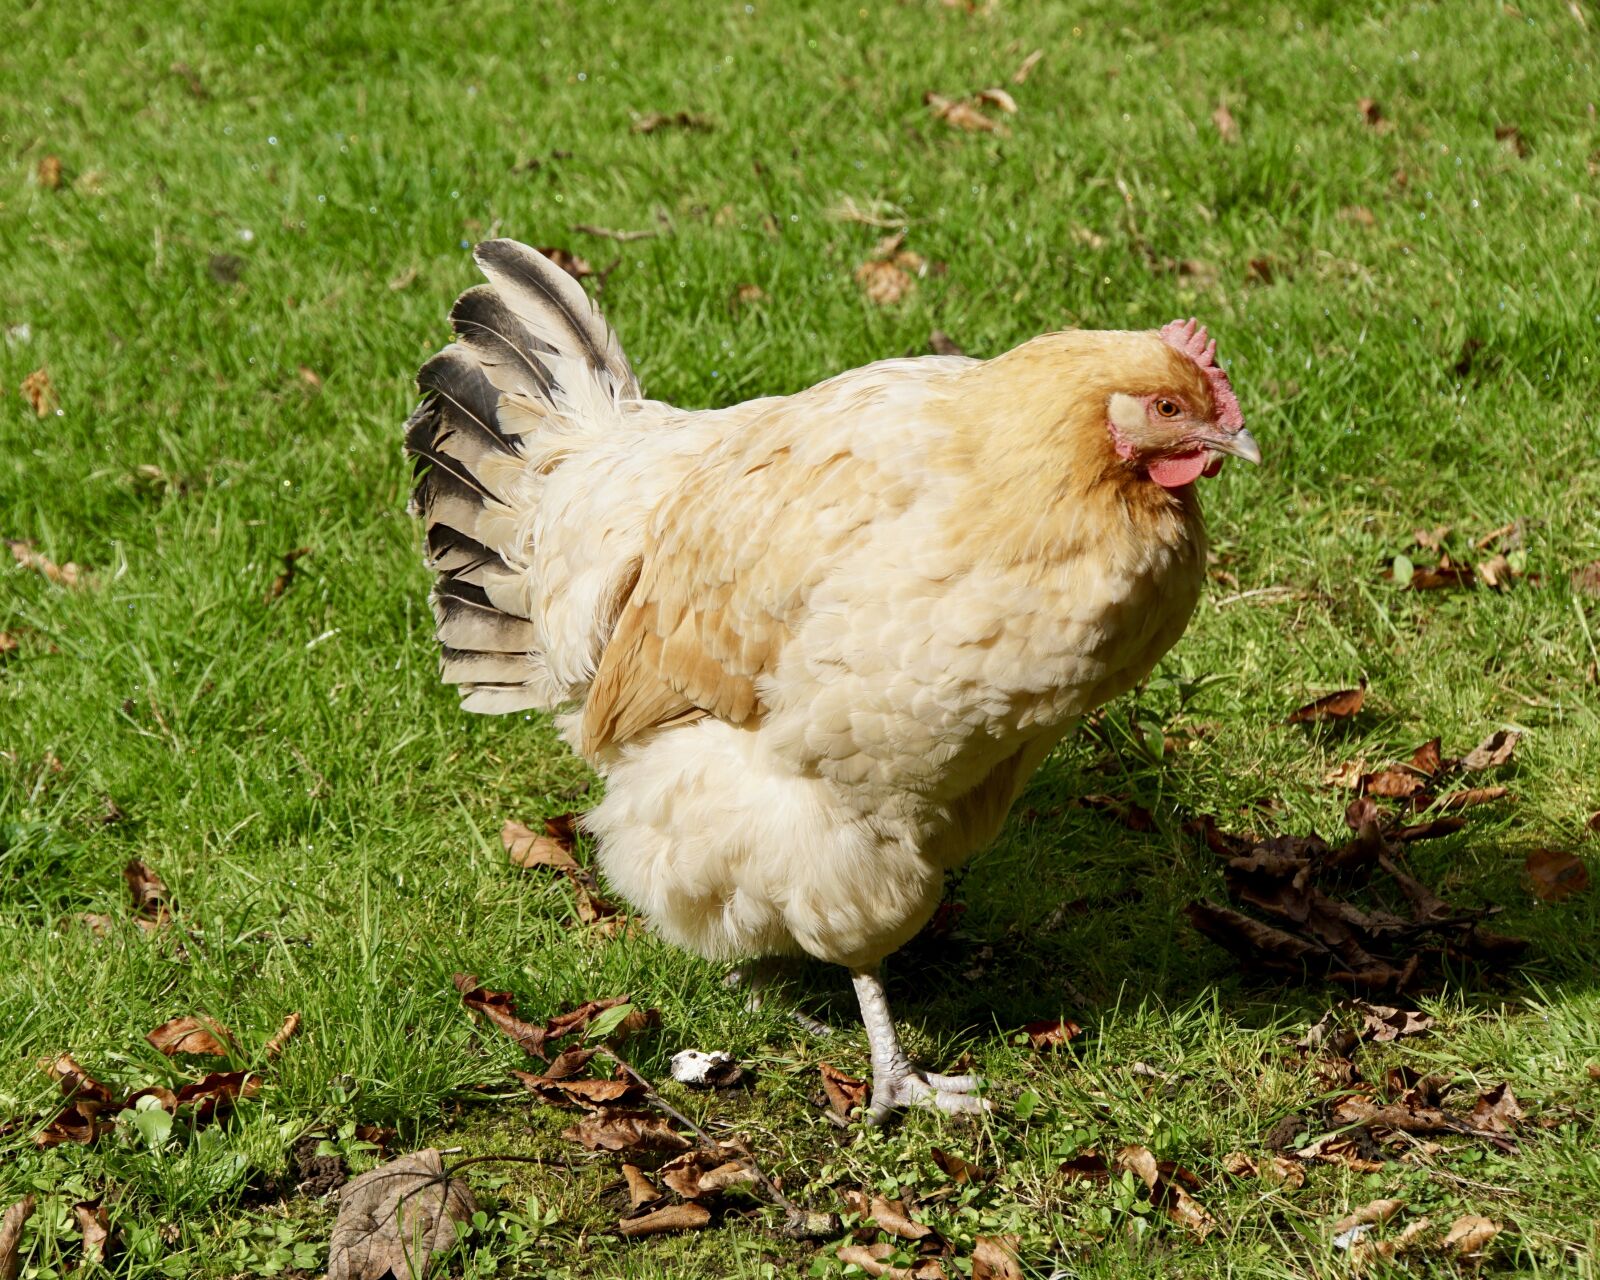 Sony a6000 sample photo. Chicken, country life, poultry photography